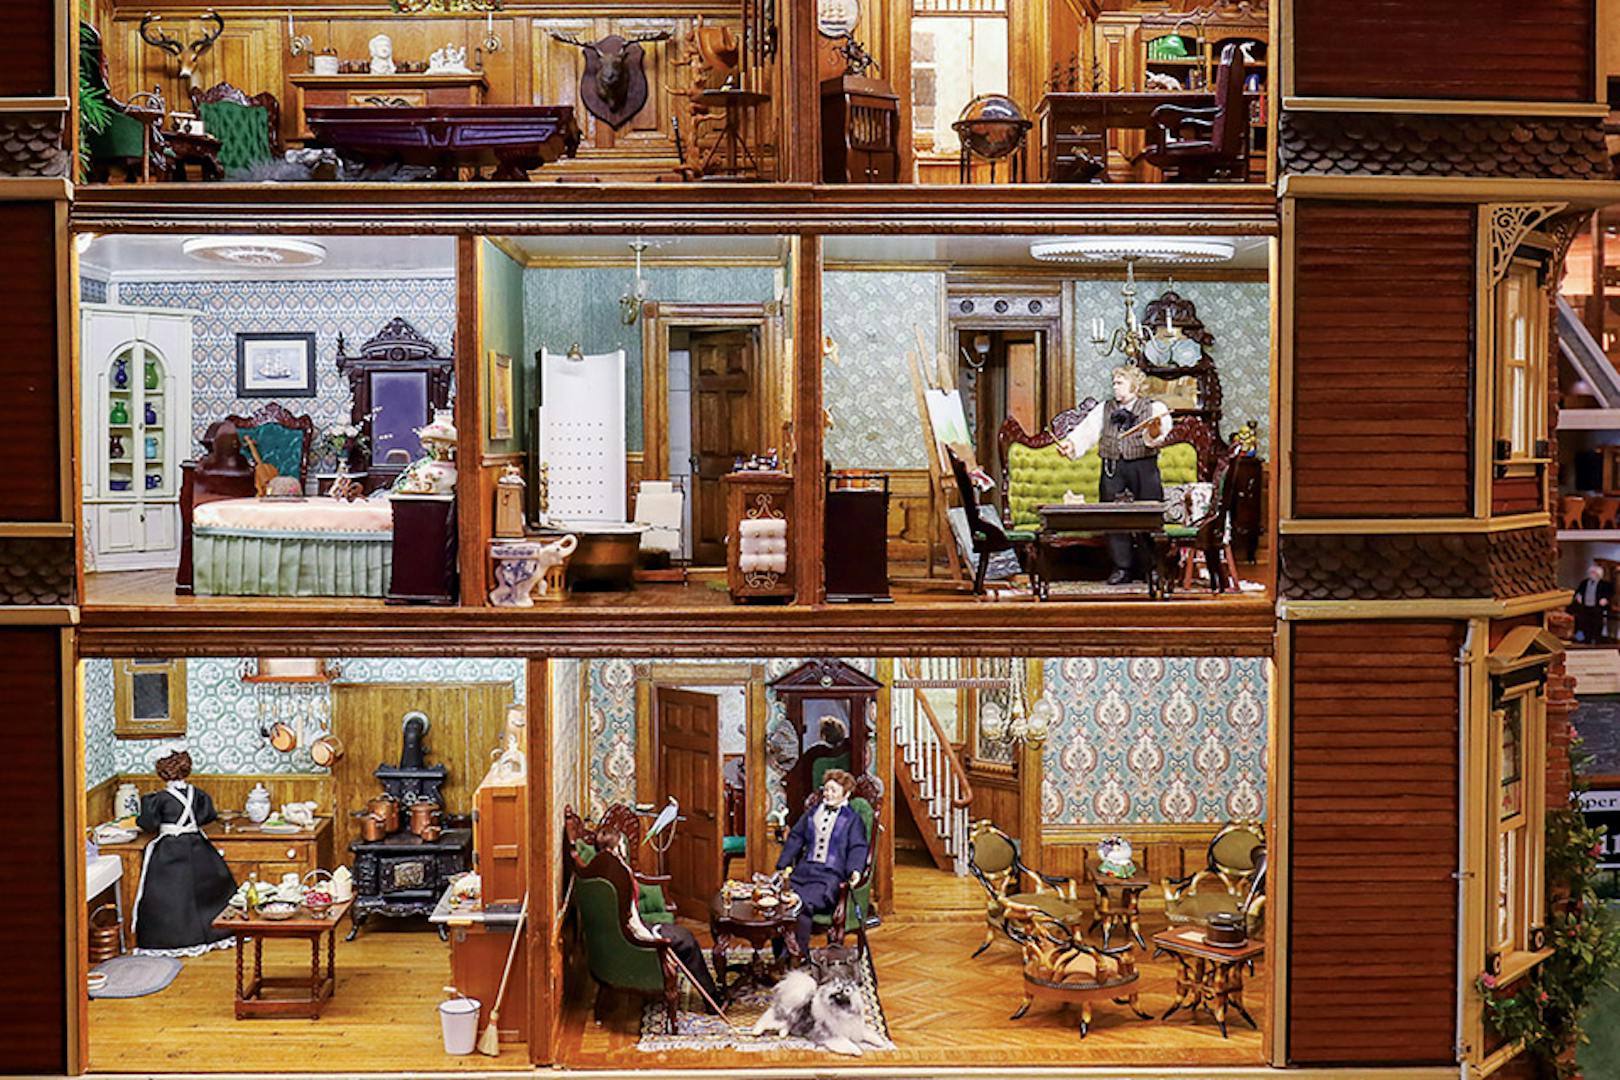 Fully furnished dollhouse at The Great American Dollhouse Museum in Danville, Kentucky (photo by Jon Sachs)